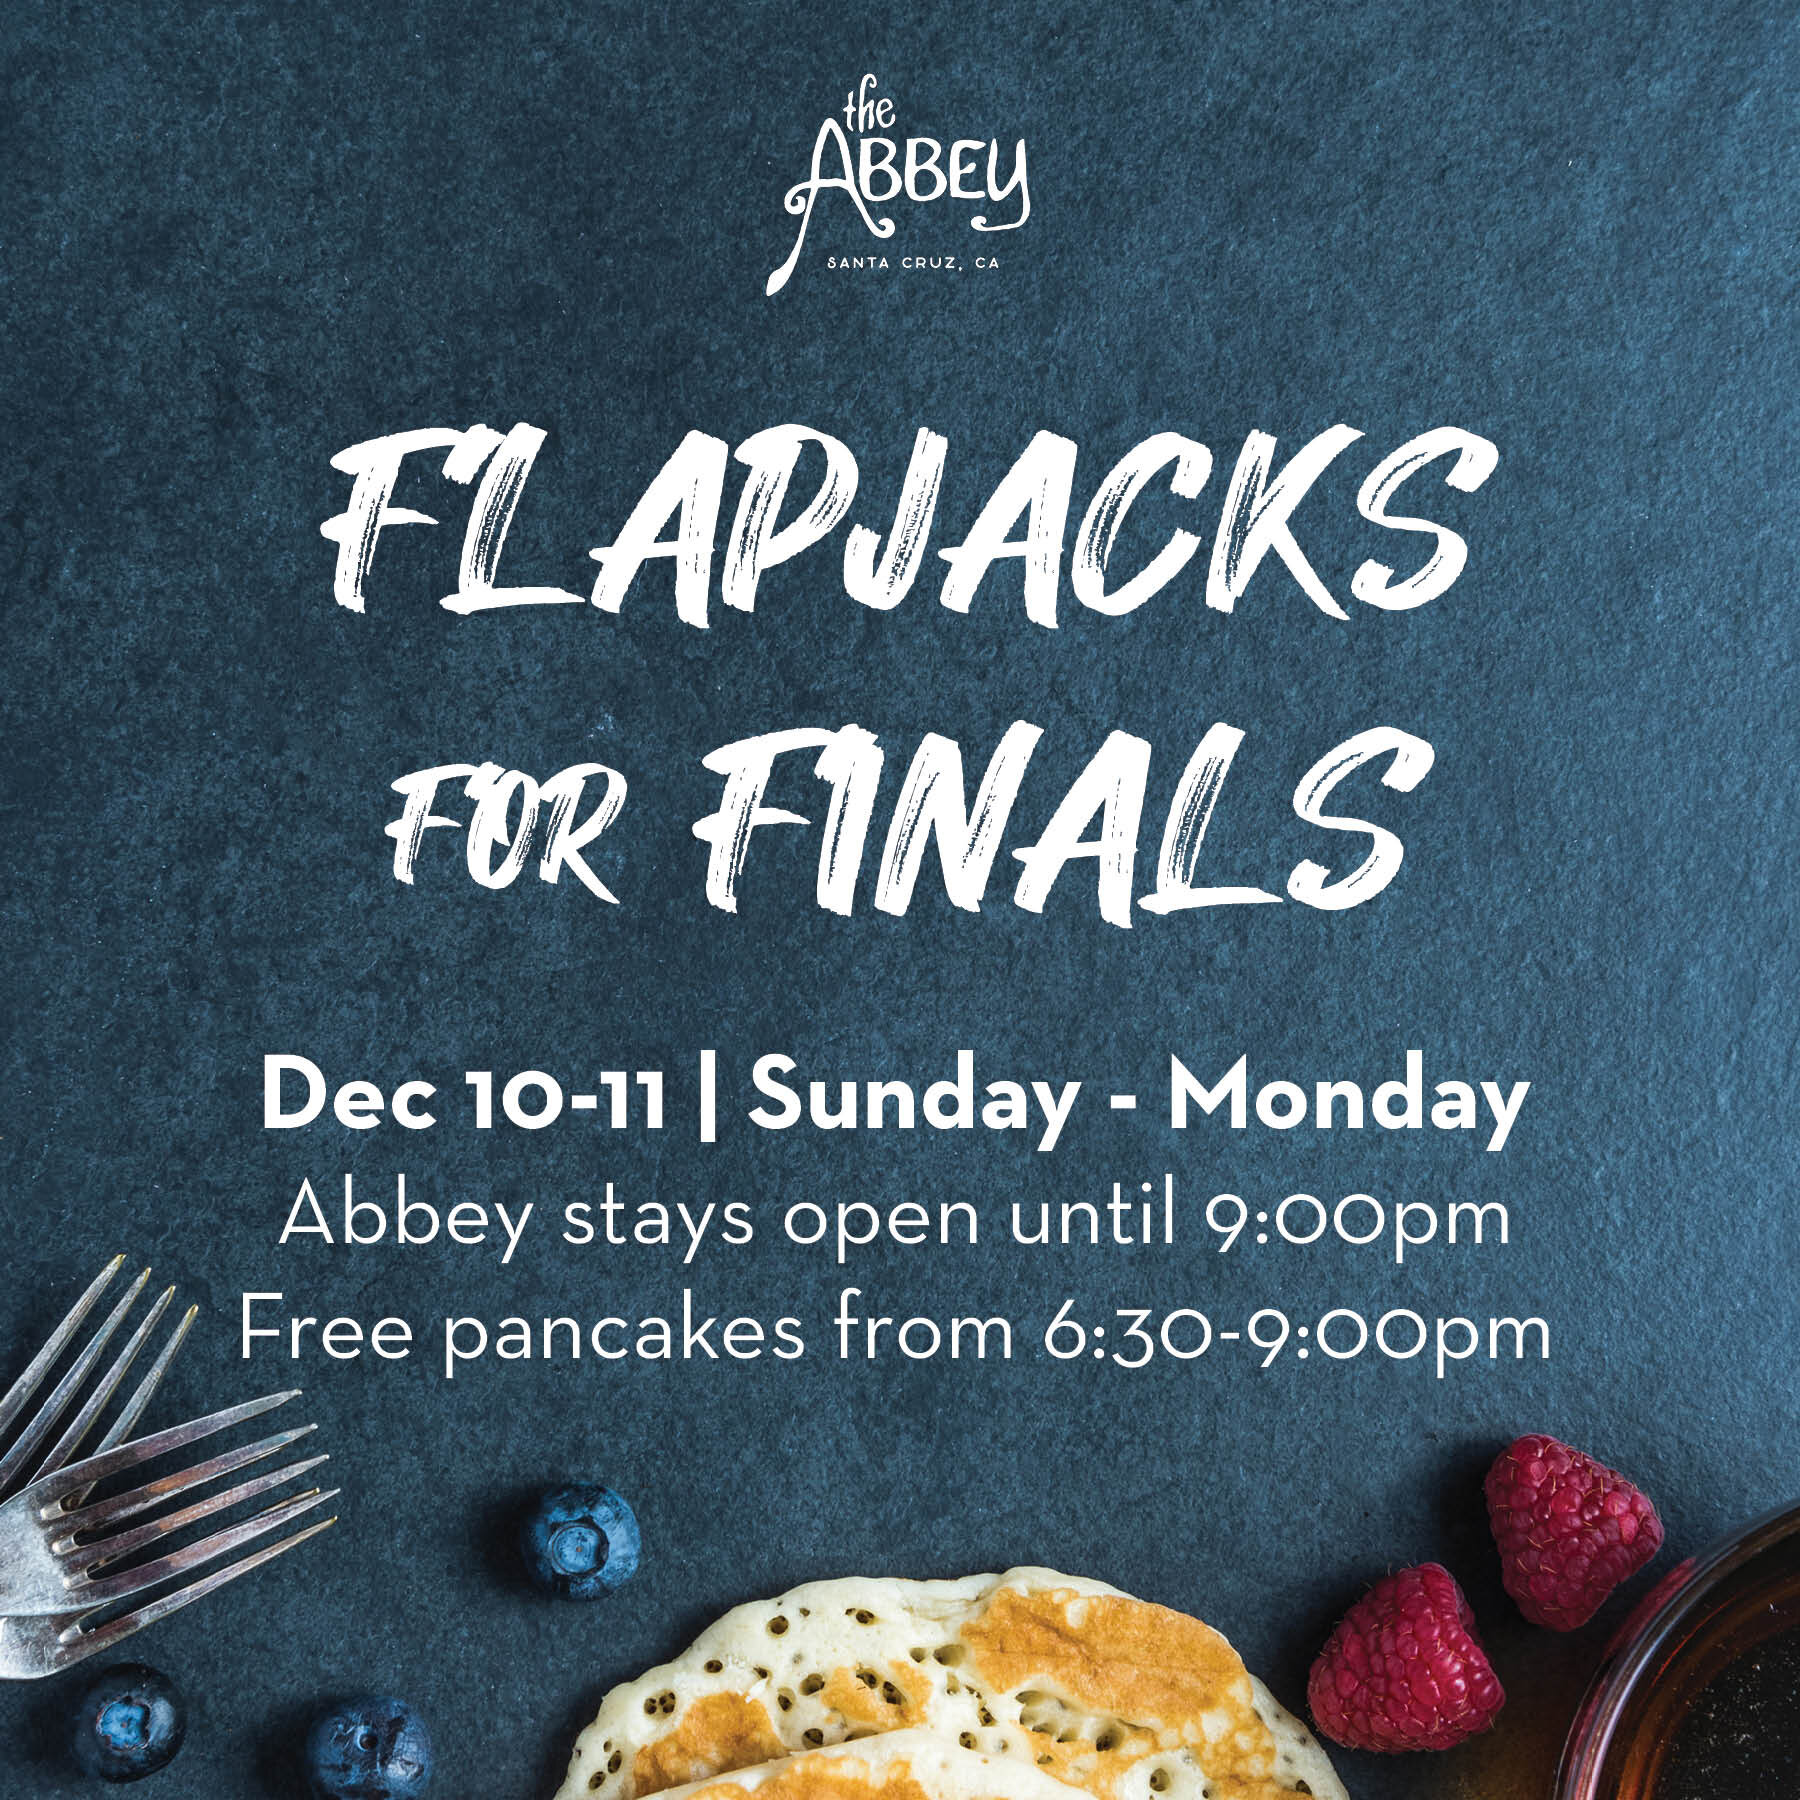 It's already that time of year!!!!!! Come study late with free flapjacks and coffee from 6:30-9PM this Sunday and Monday. 
Espresso bar open until 6PM.
#ucsc #theabbeysc #flapjacksforfinals